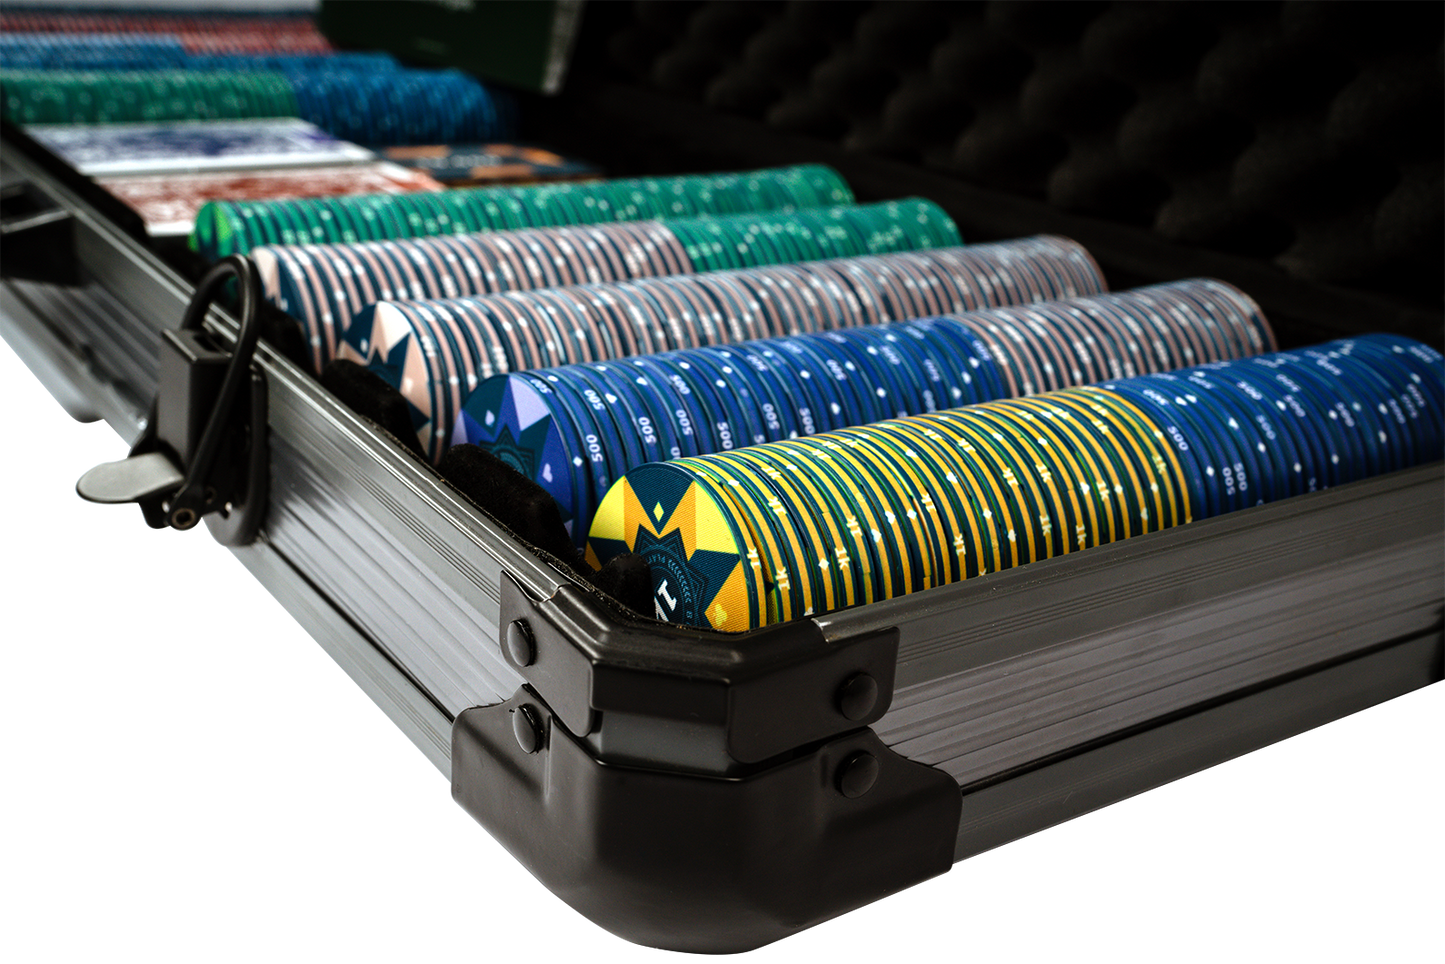 Poker case with 500 ceramic poker chips "Paulie" with values